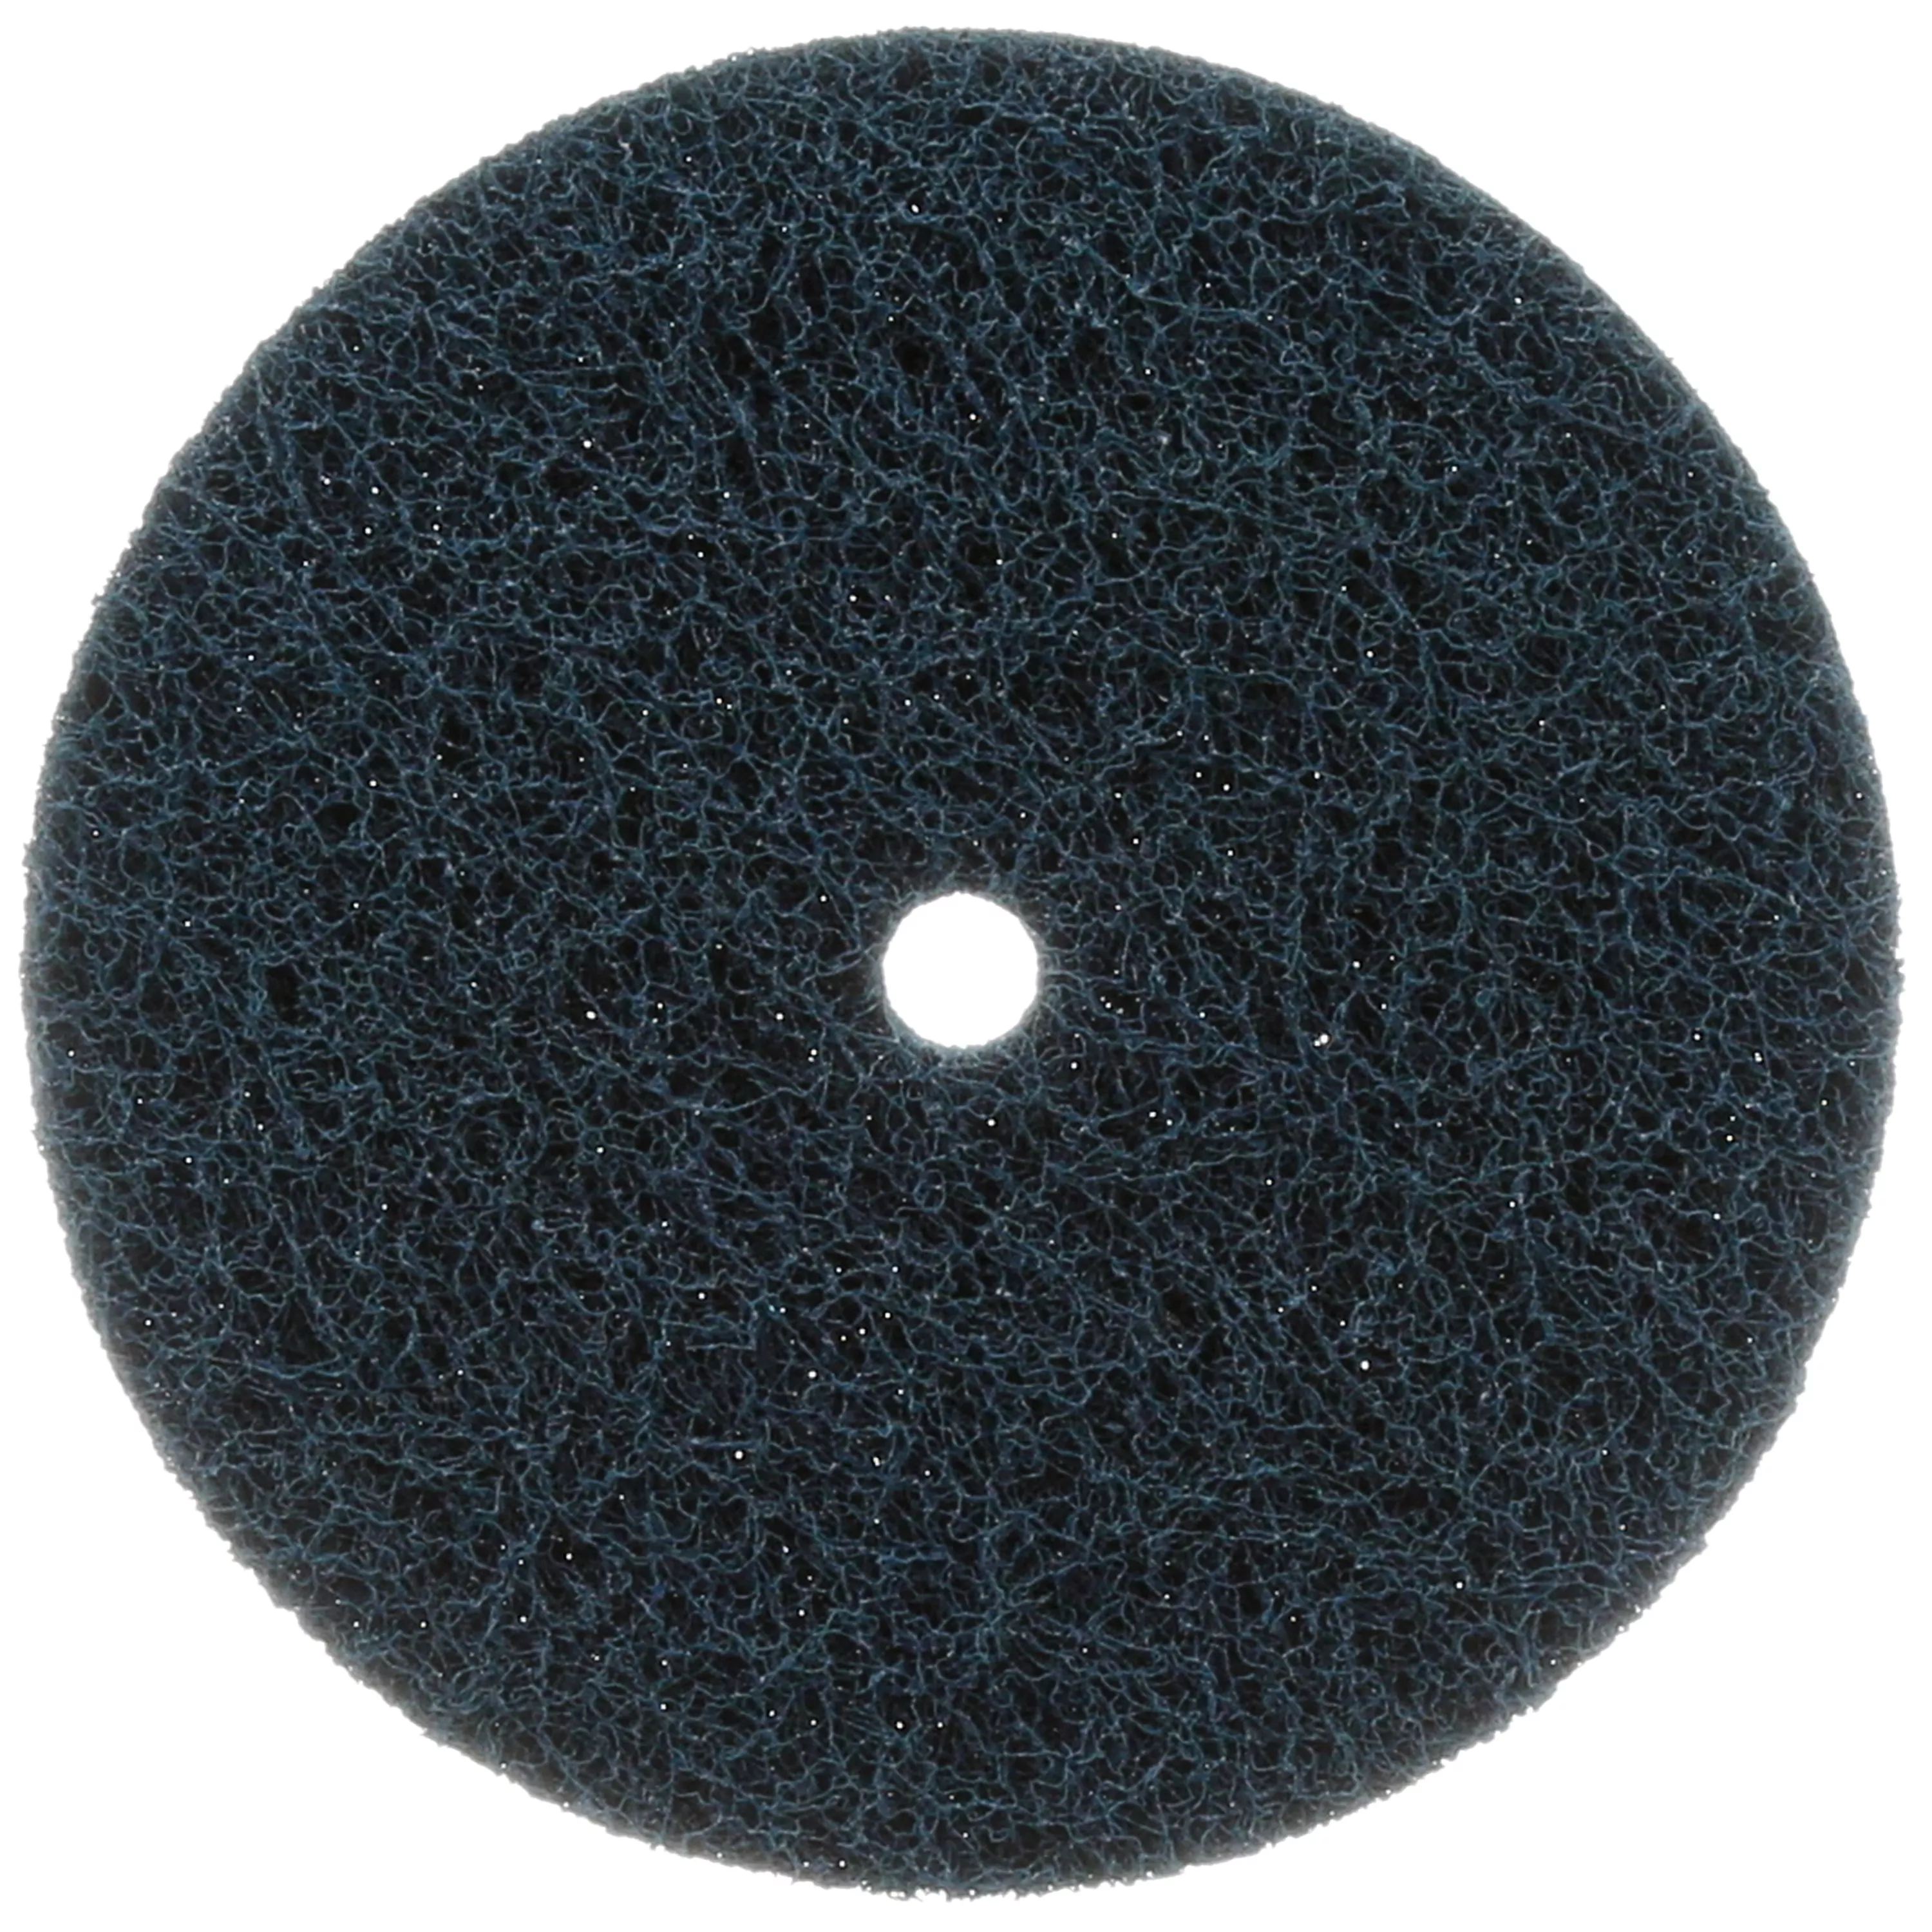 Standard Abrasives™ Buff and Blend HS Disc, 810710, 6 in x 1/2 in A MED,
10/Carton, 100 ea/Case